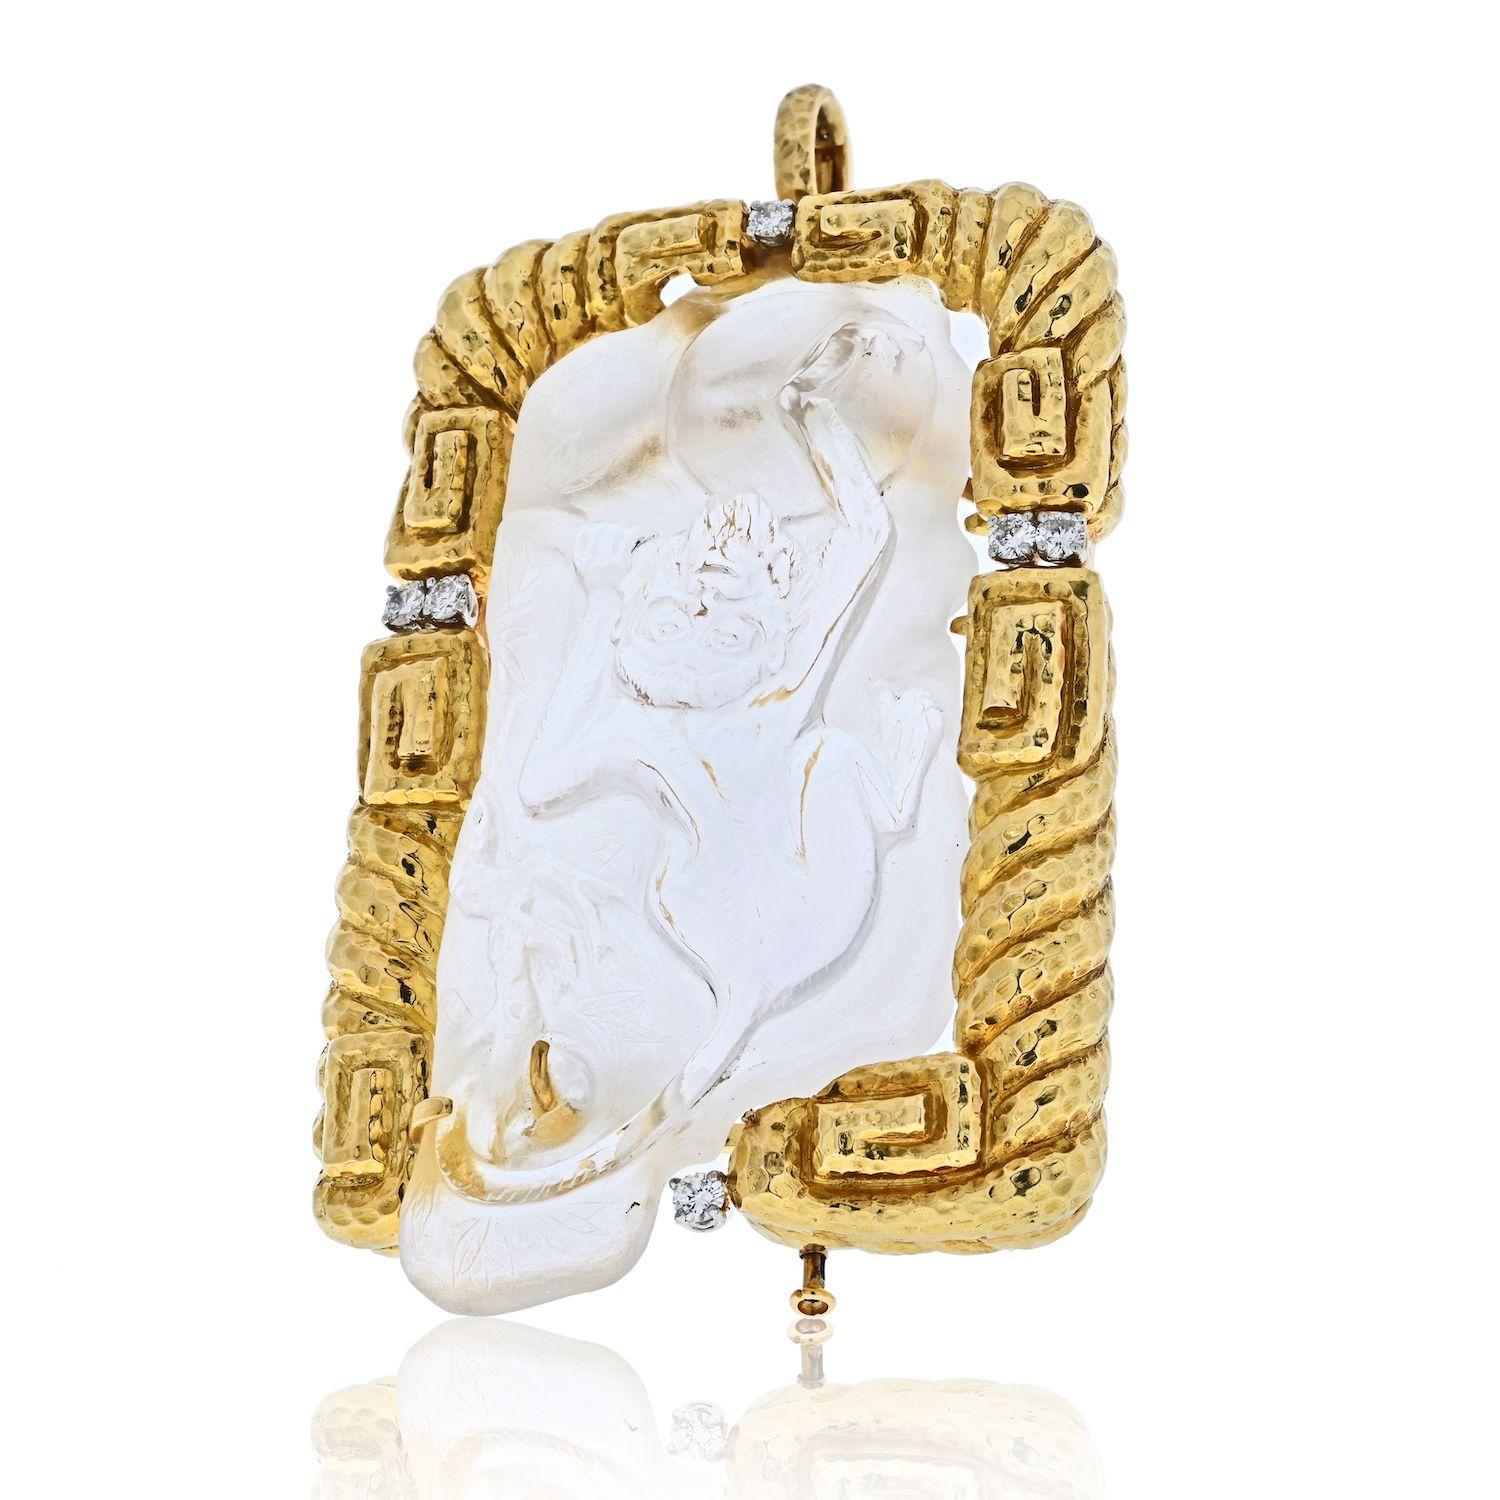 This is a striking David Webb Rock Crystal, Diamond, and Monkey Gold Pendant that can double as a Brooch.
Rock crystal rectangular carving of a monkey.
Round brilliant-cut diamonds, total weight approximately 0.80 cts. 
18K yellow gold, pendant